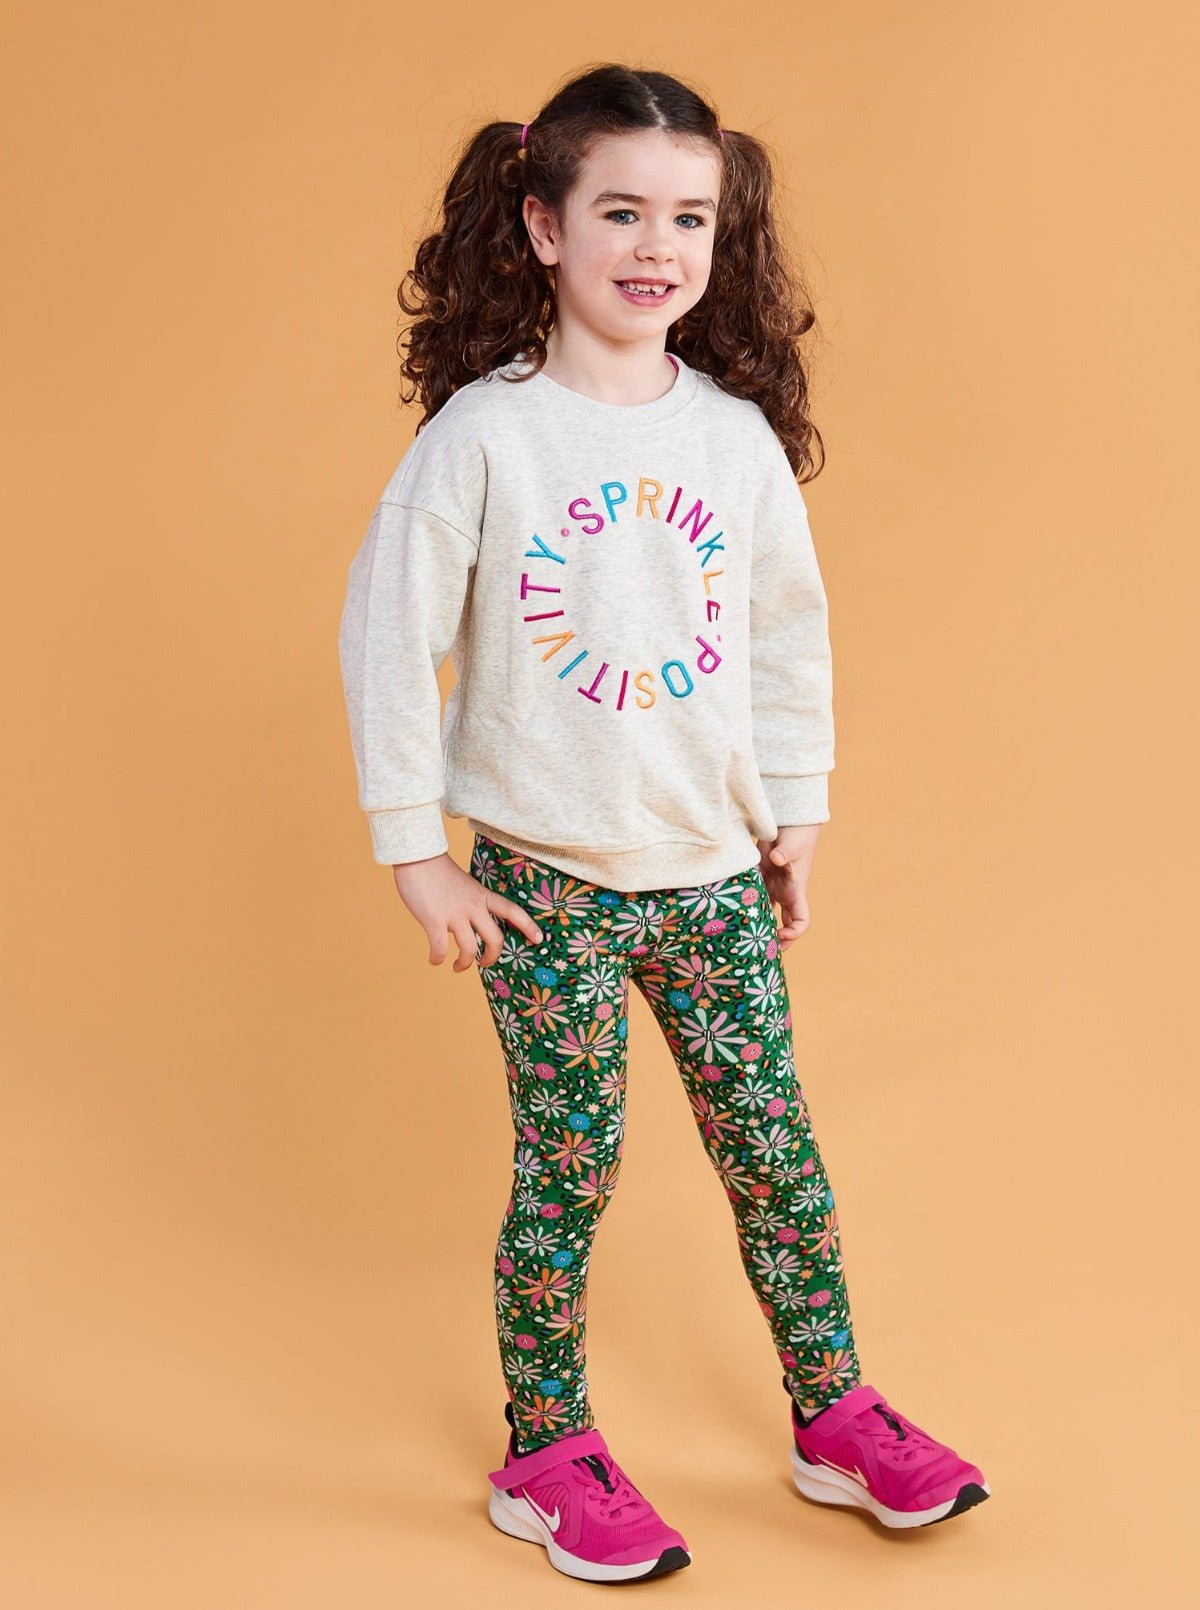 Wild Flower - Bamboo Kids Leggings -bright colourful kids clothes